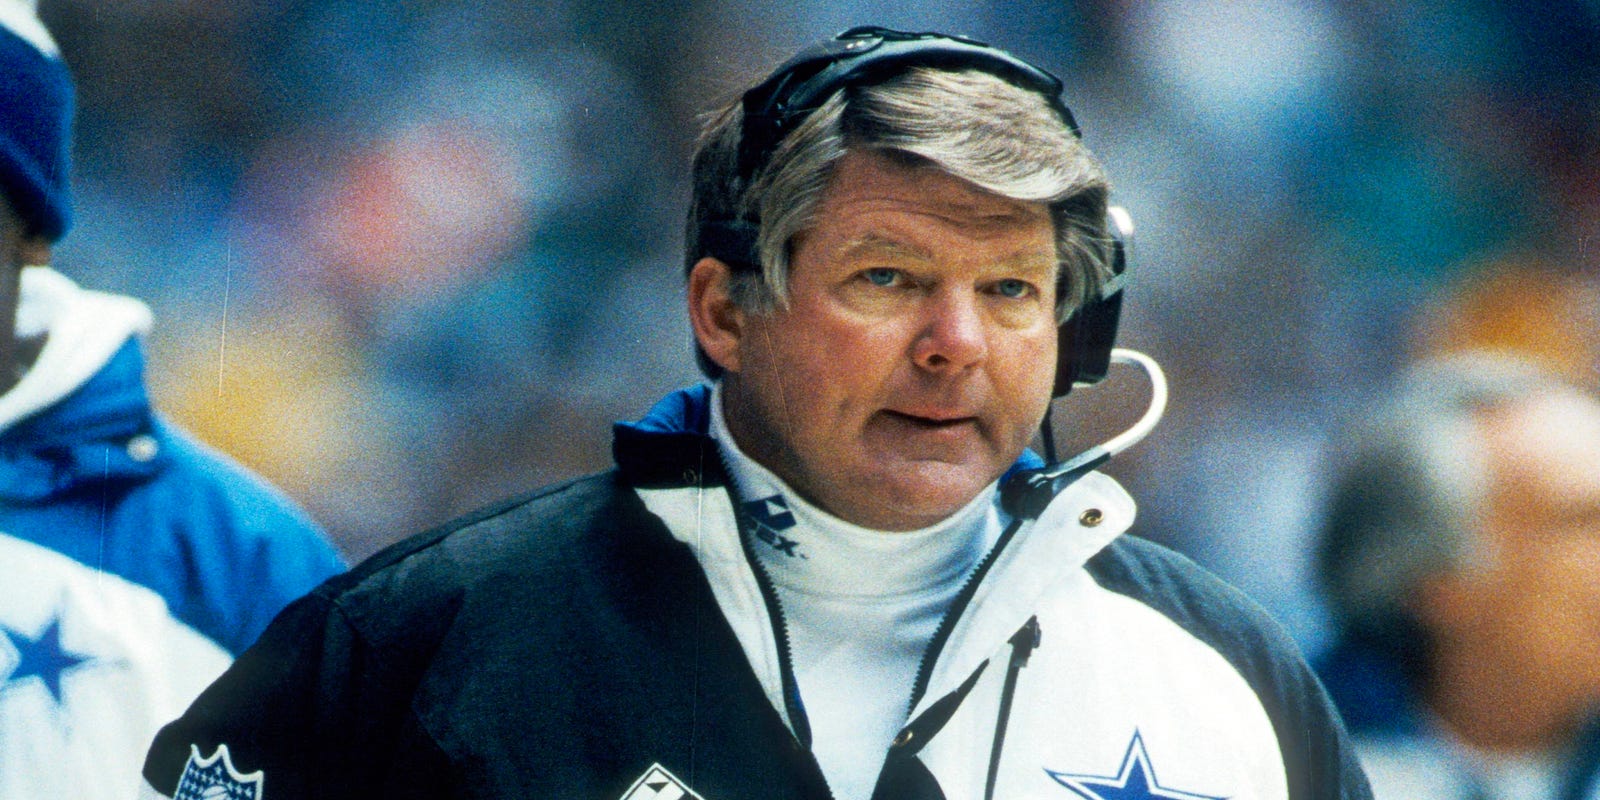 Former Cowboys coach Jimmy Johnson reflects on Thanksgiving
Day blunder: 'I outsmarted myself'